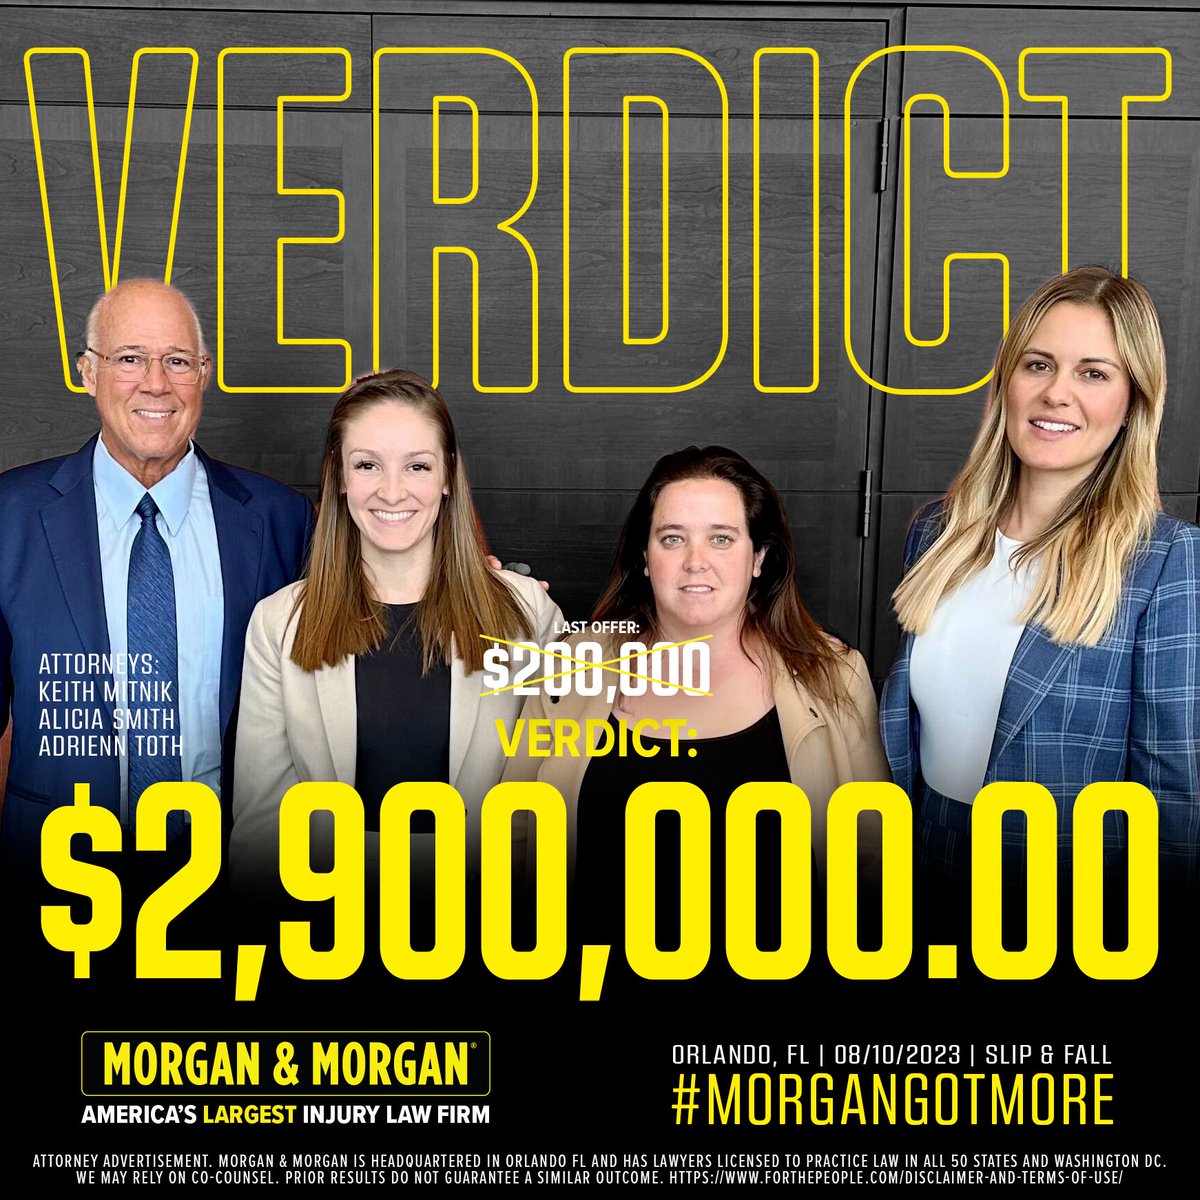 🚨#VerdictAlert:

Keith Mitnik, Alicia Smith and Adrienn Toth just received a $2,900,000.00 verdict for our client on a slip & fall case against Family Dollar Store.

The last offer was $200,000. That’s #MorganMath 💪

#MorganGotMore #ForThePeople #LAW